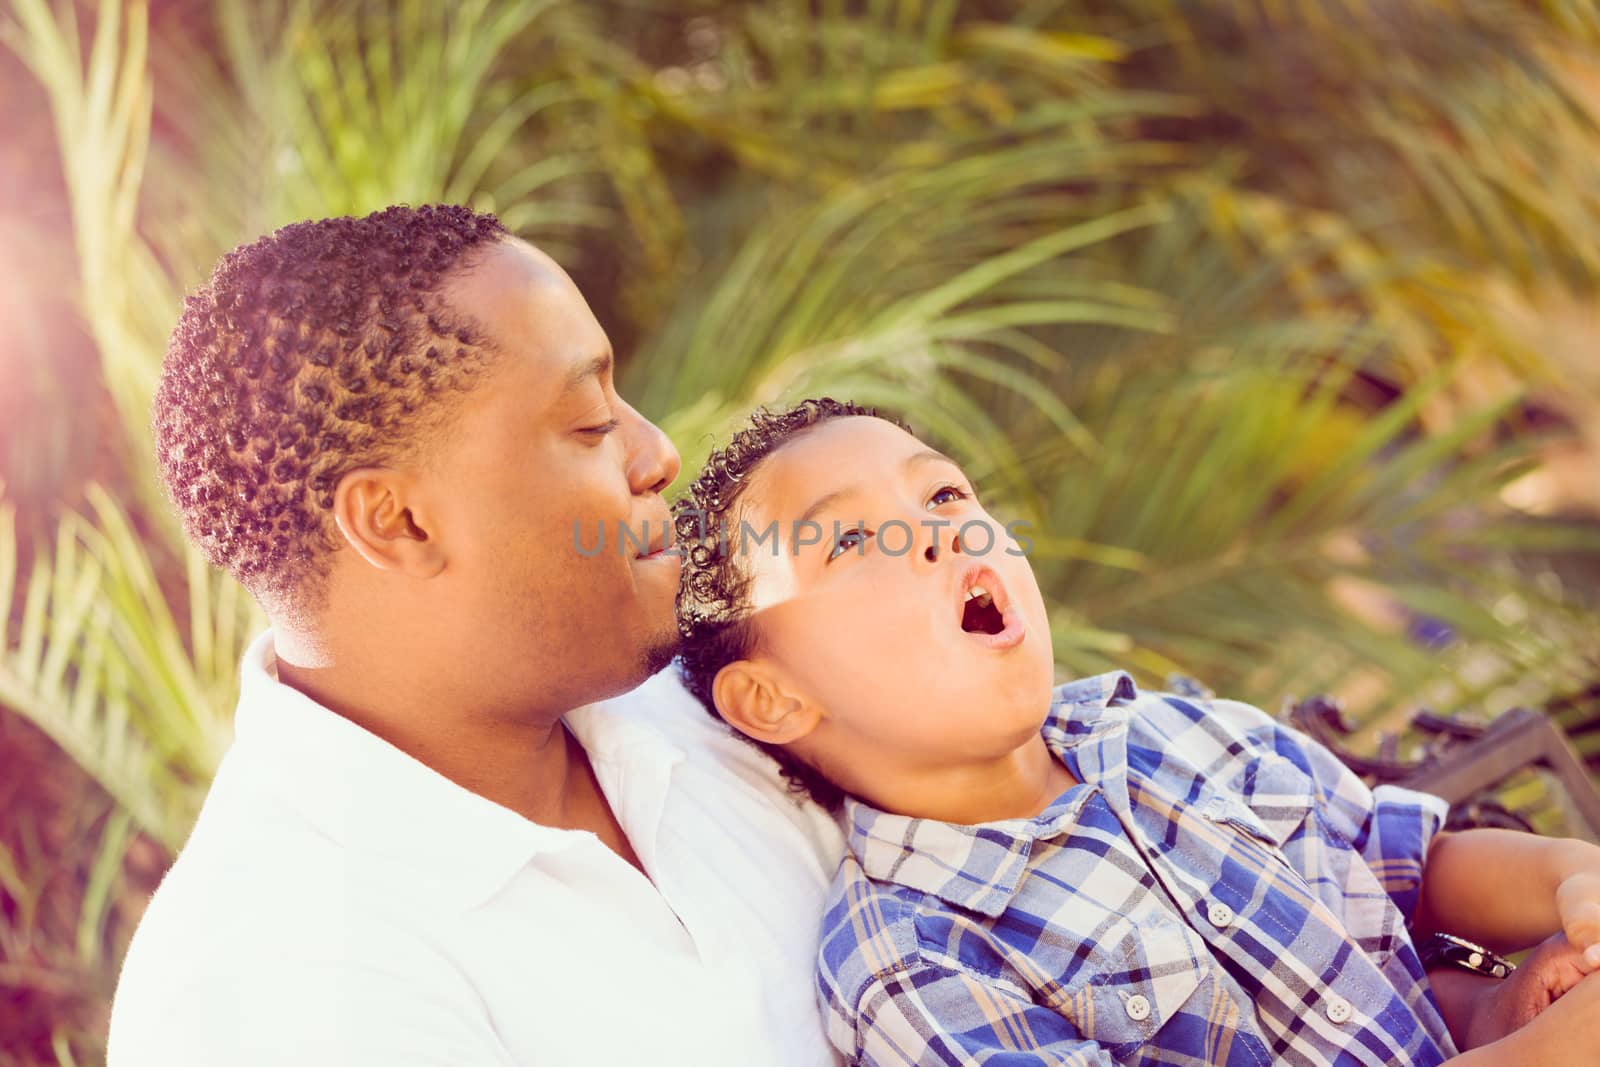 Mixed Race Son and African American Father Playing Outdoors Together.